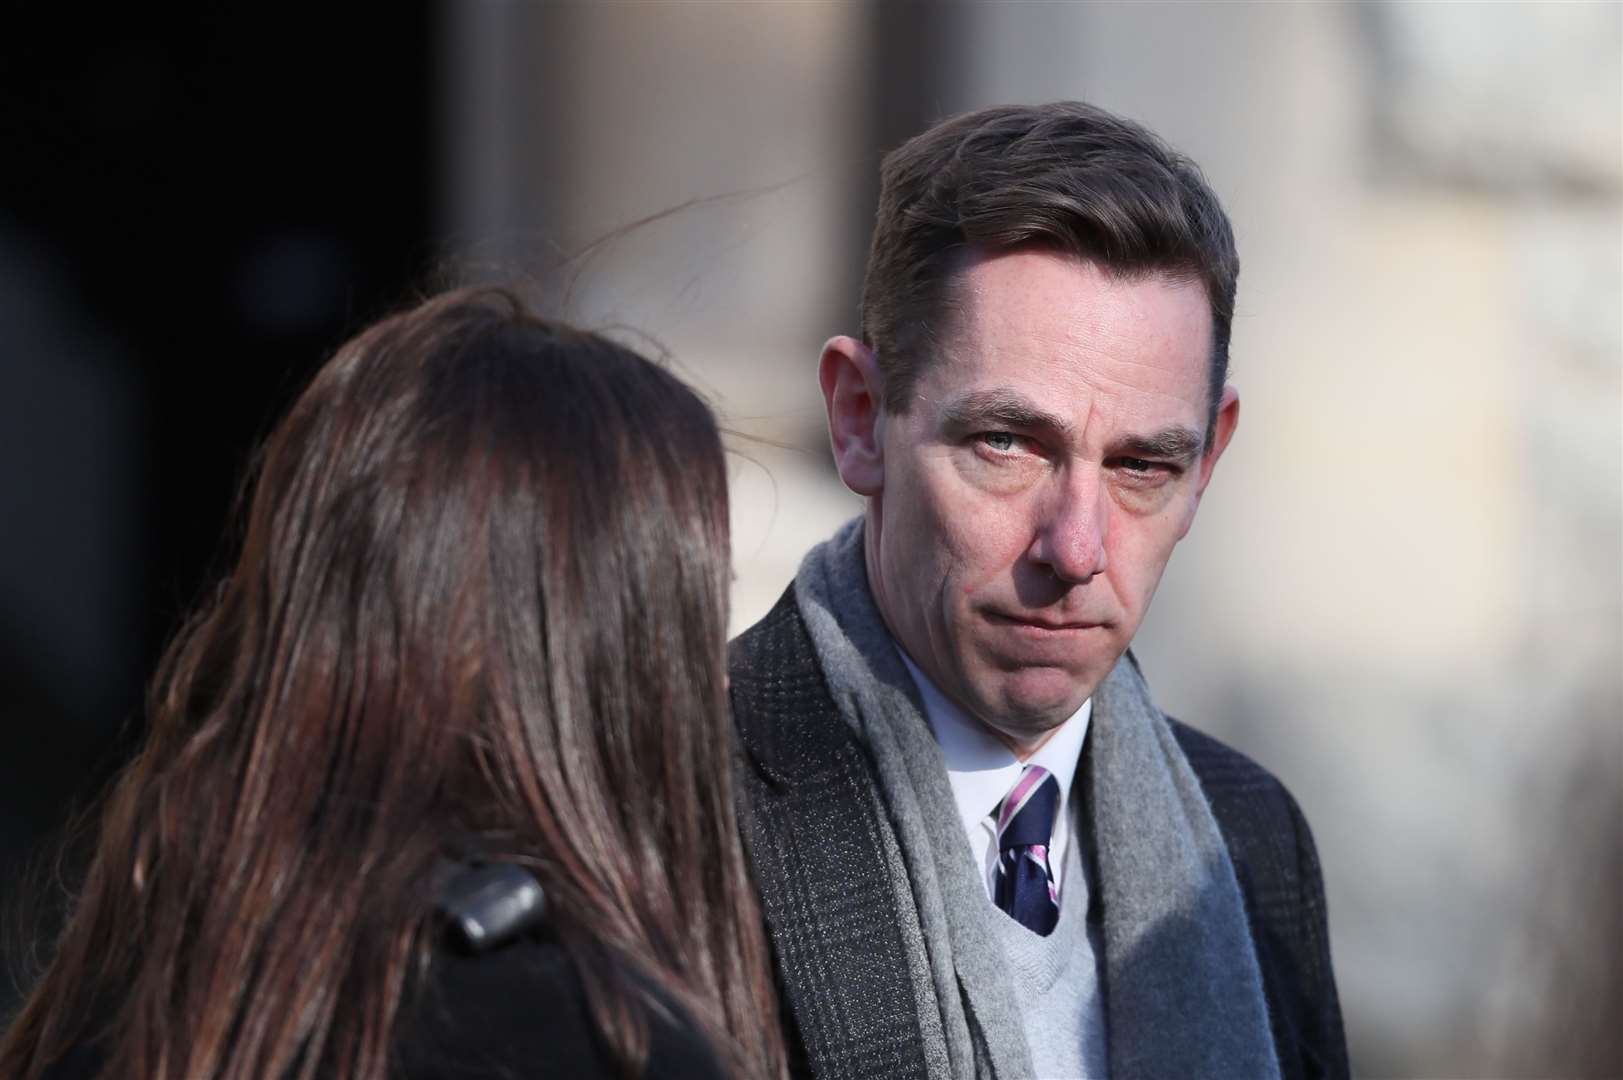 RTE presenter Ryan Tubridy apologised for not asking questions when his salary was misreported (Brian Lawless/PA)